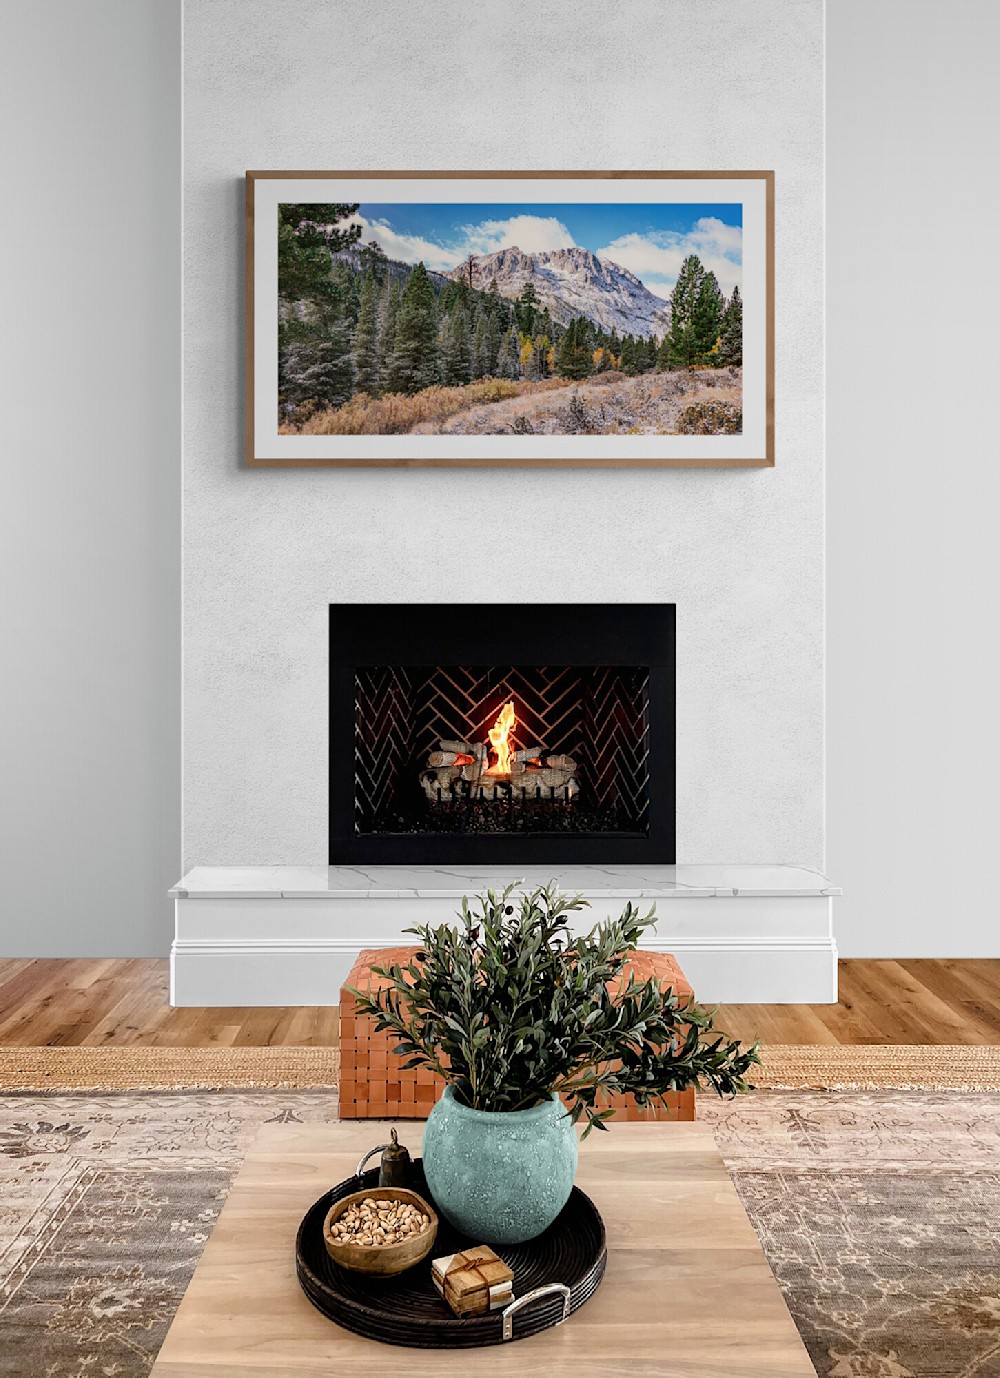 picture of "A Light Dusting" displayed in a room